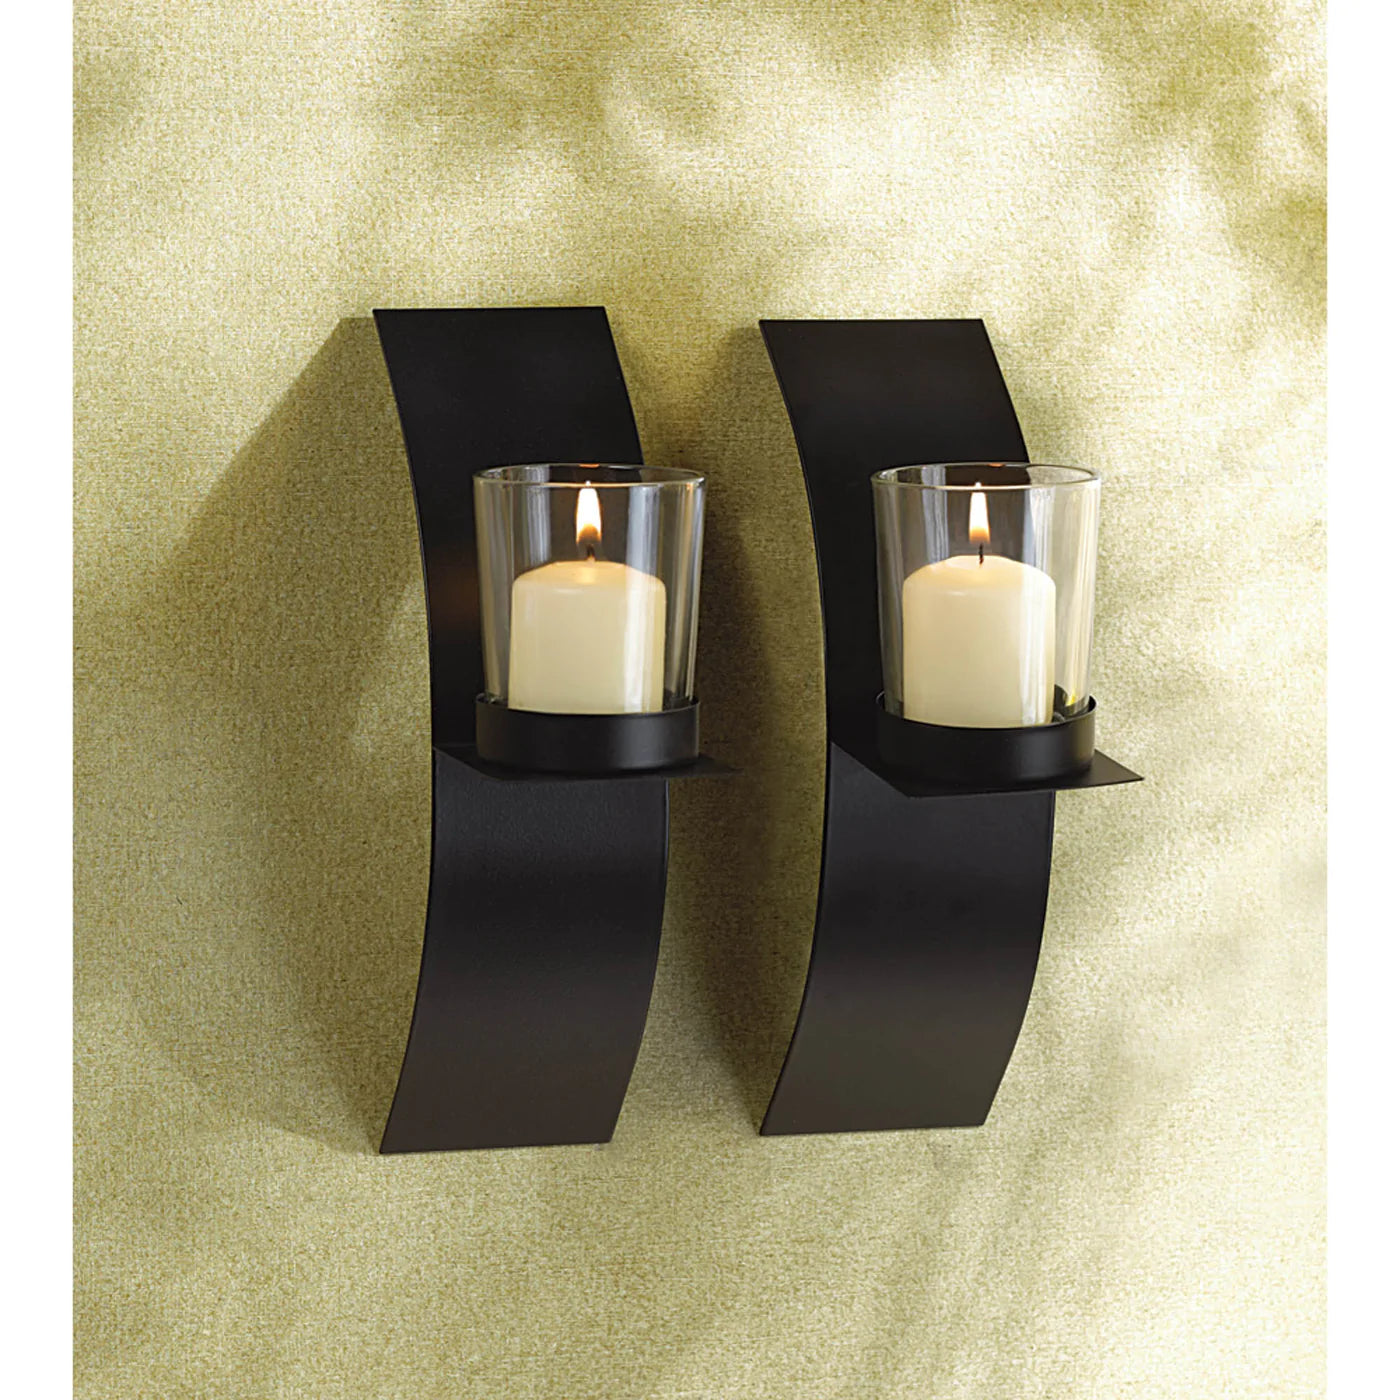 Mod Art Candle Sconce Duo